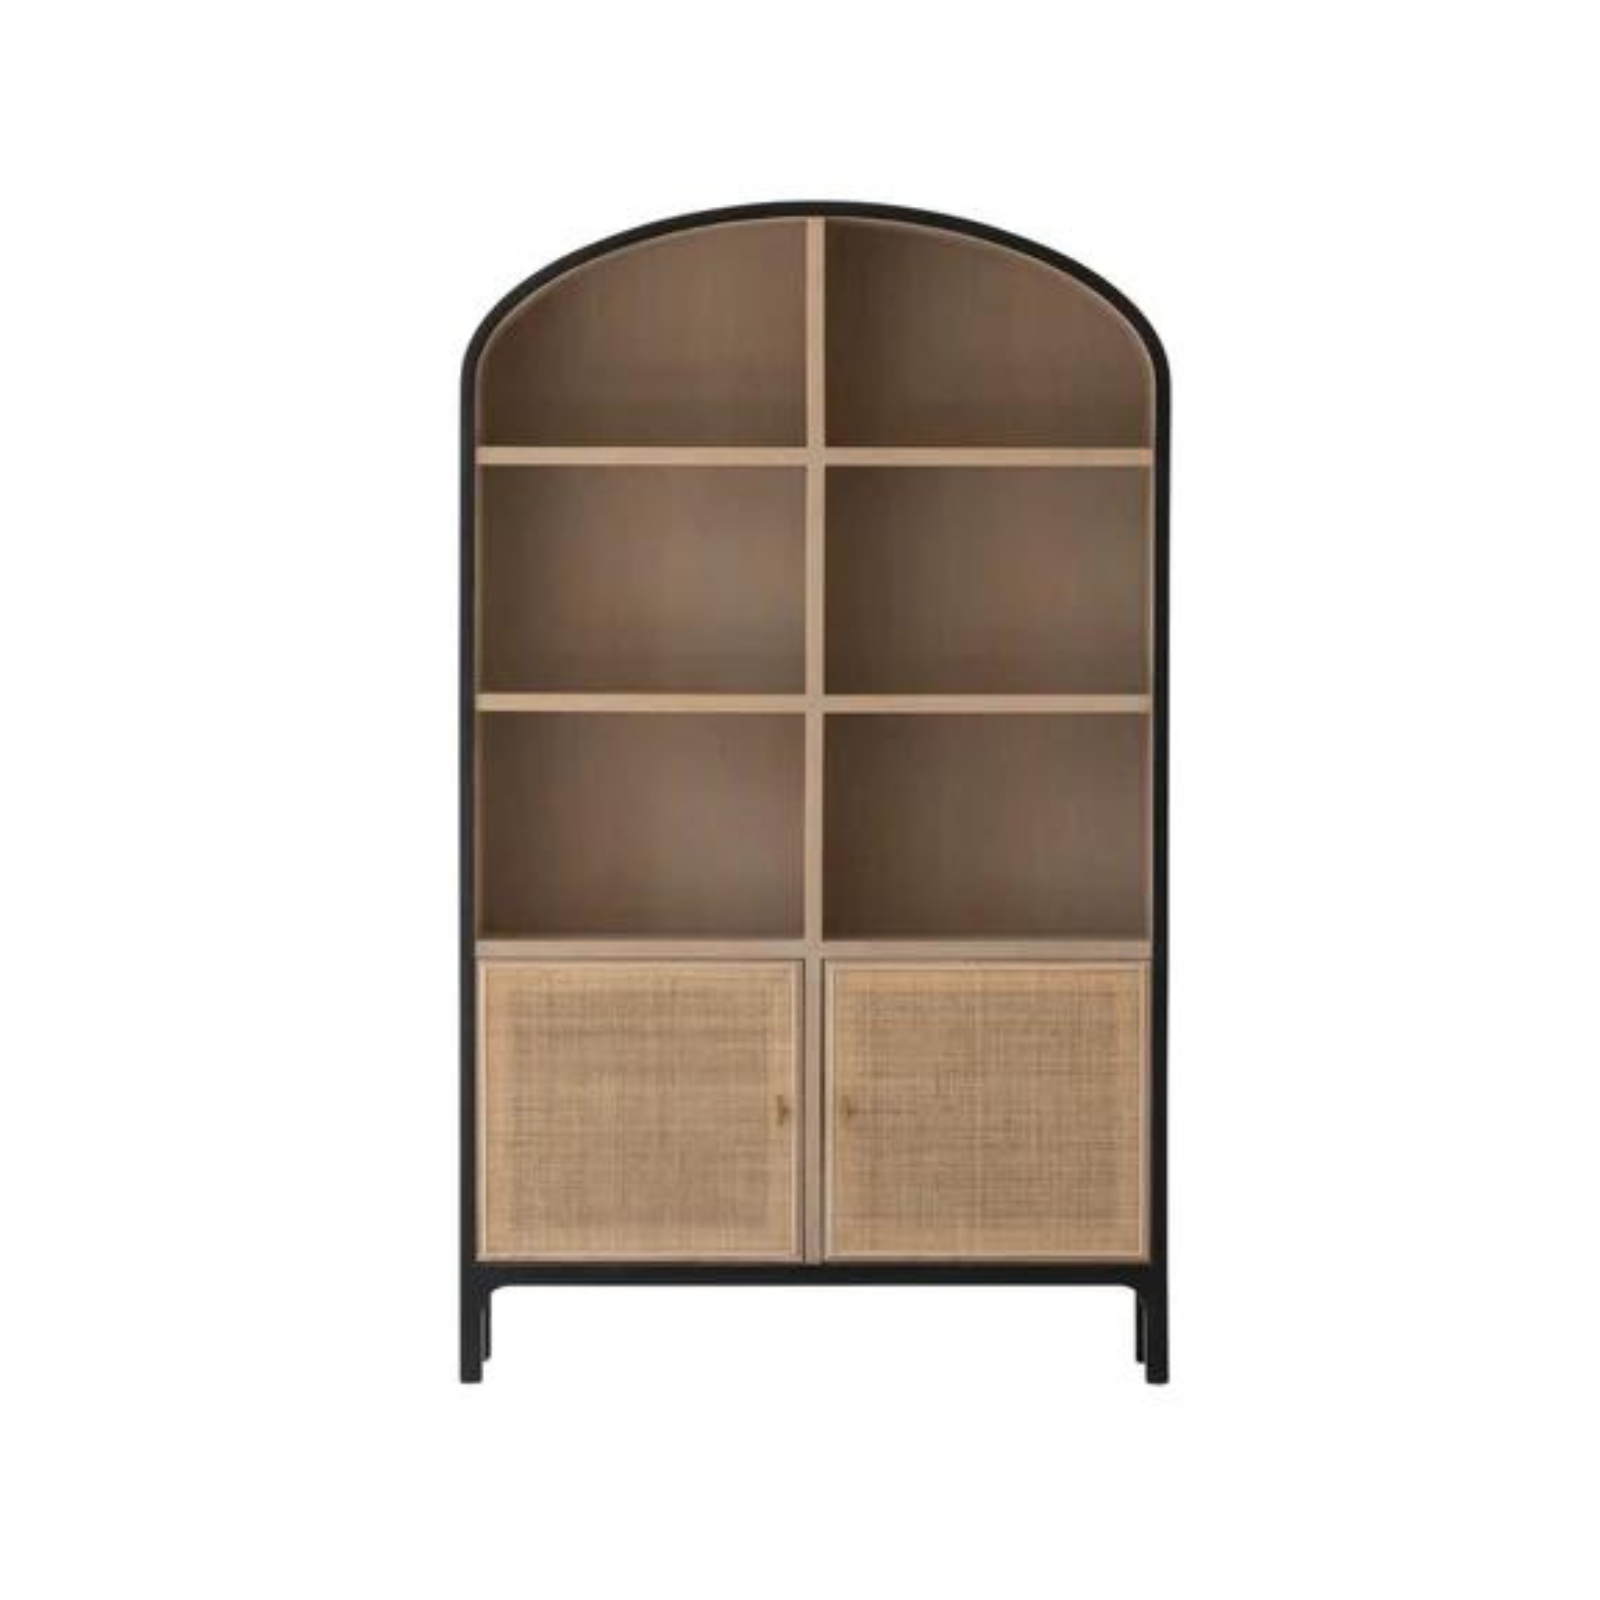 Peter Tall Cabinet - Rug & Weave